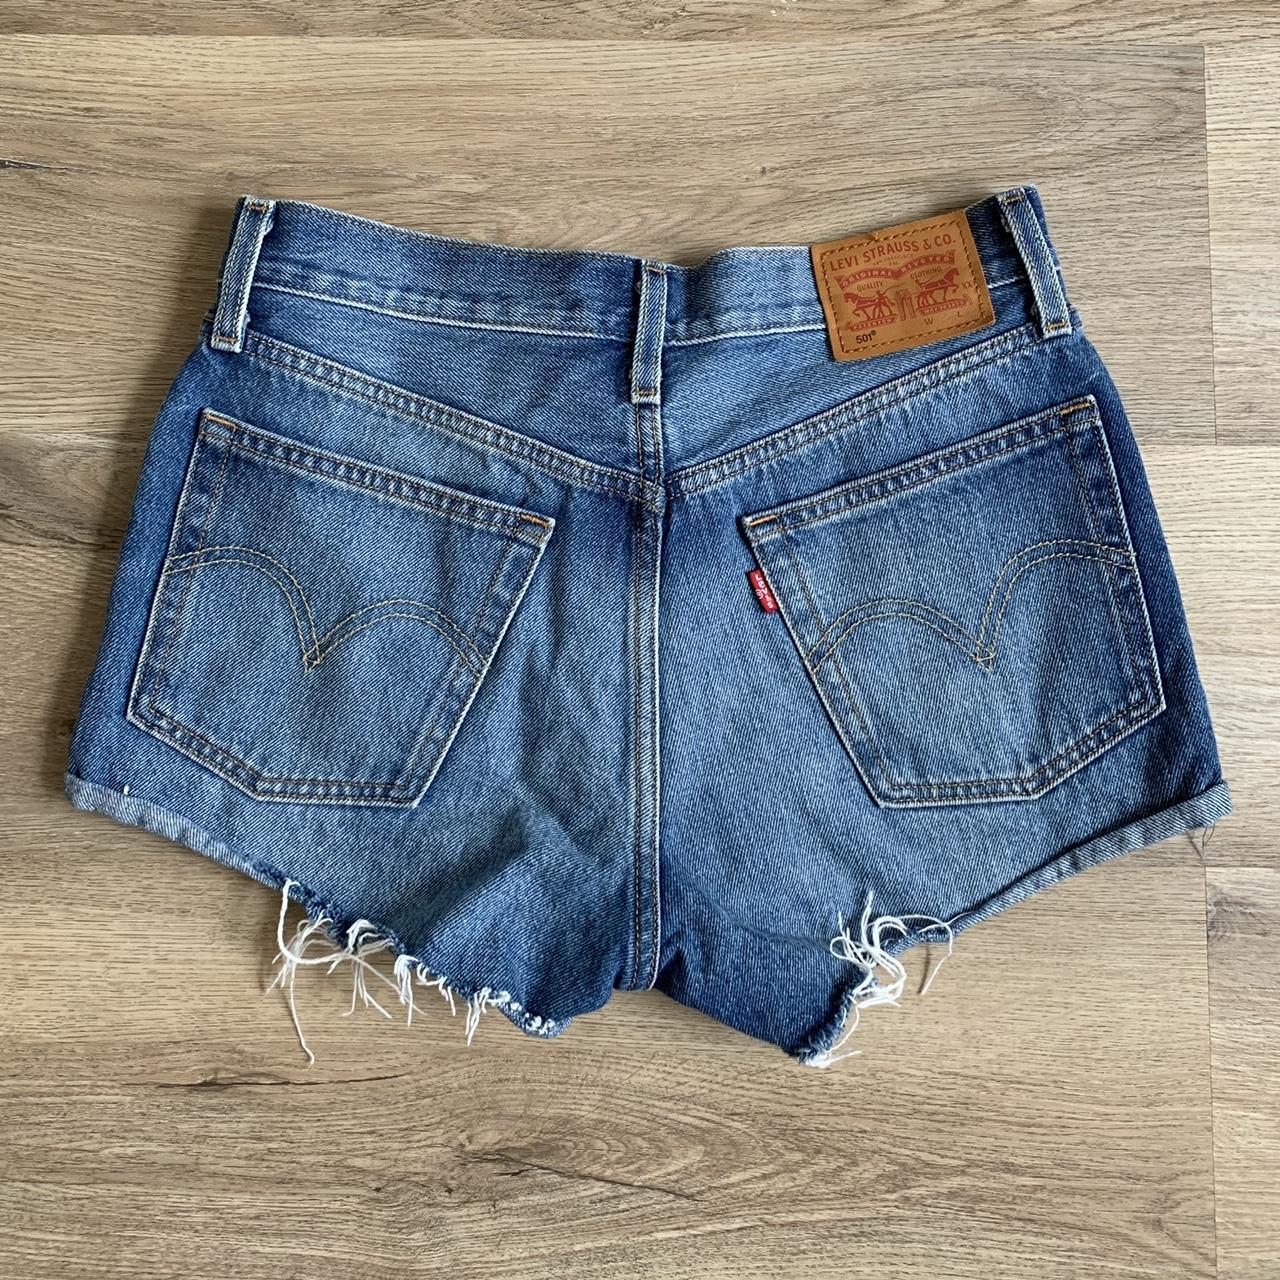 Levi's Women's Blue and White Shorts (3)